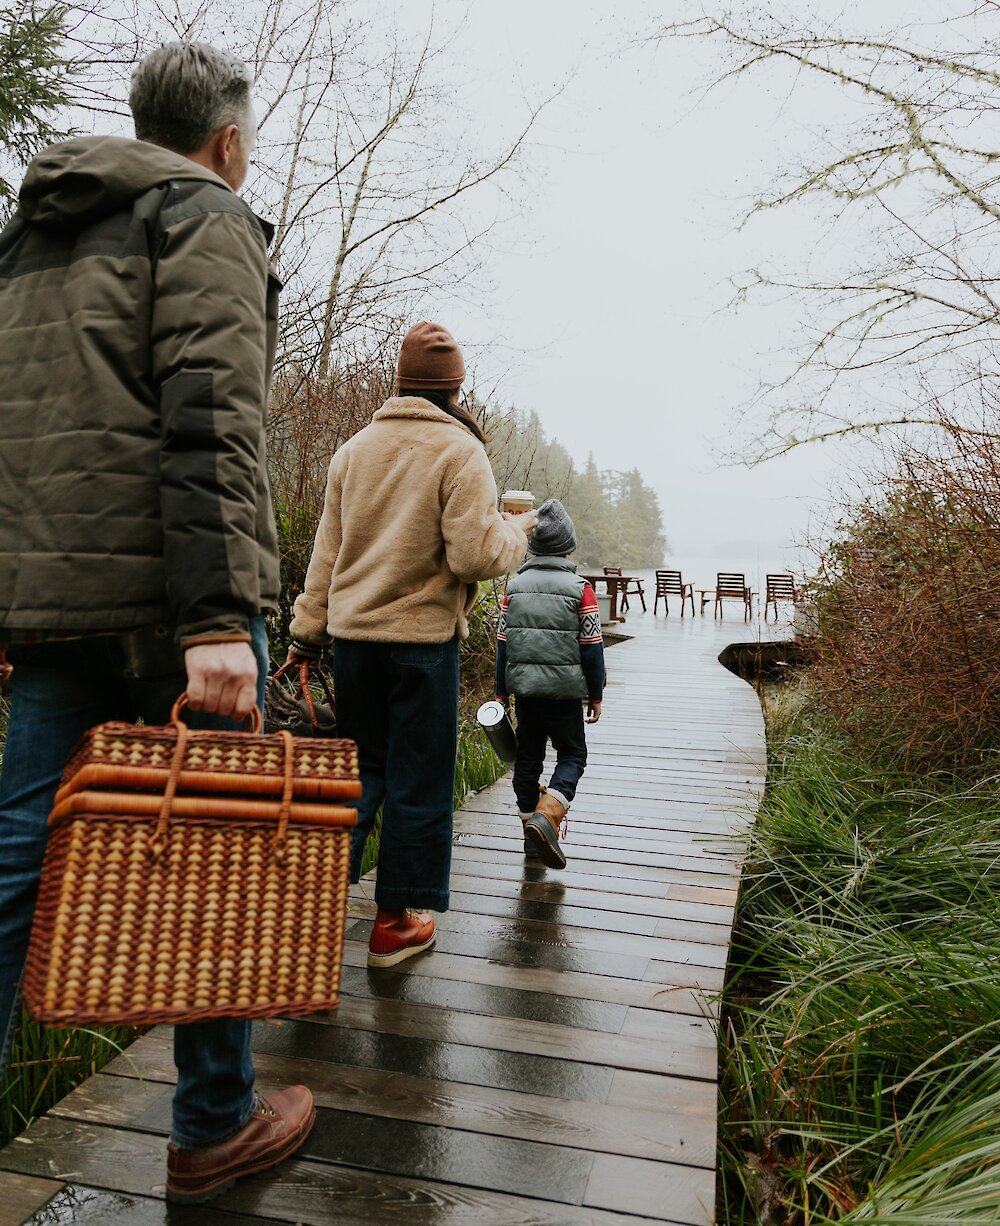 Family walking on a boardwalk with a picnic basket